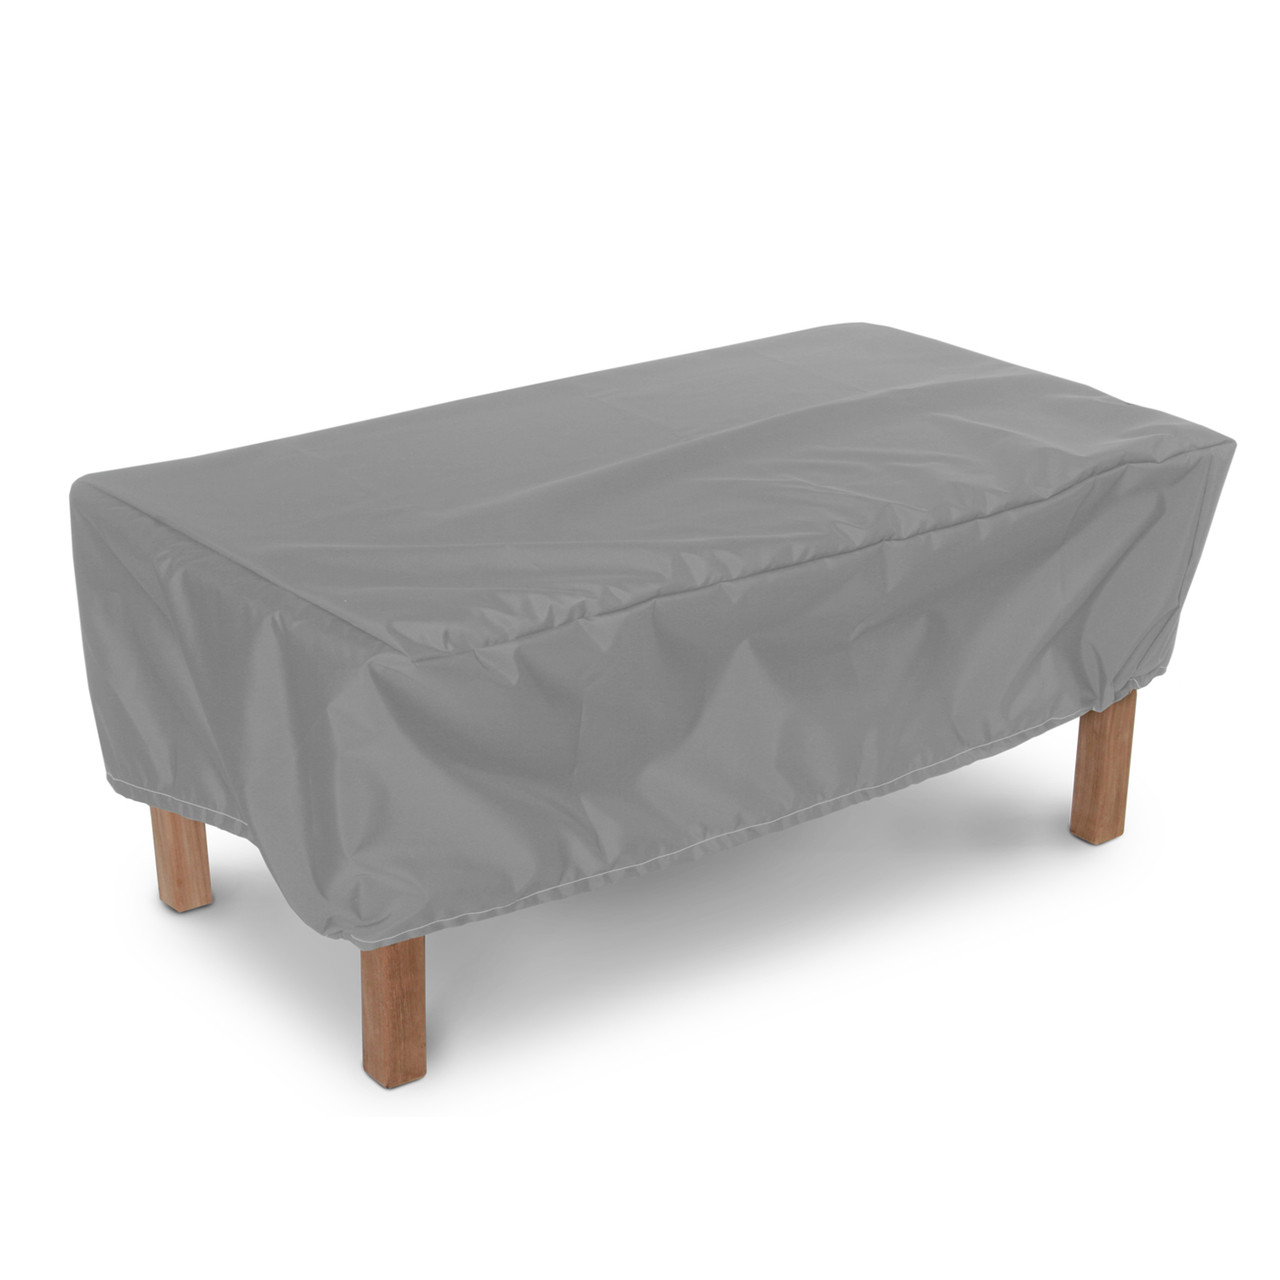 Rectangular Small Table Cover - Outdoor Furniture Covers